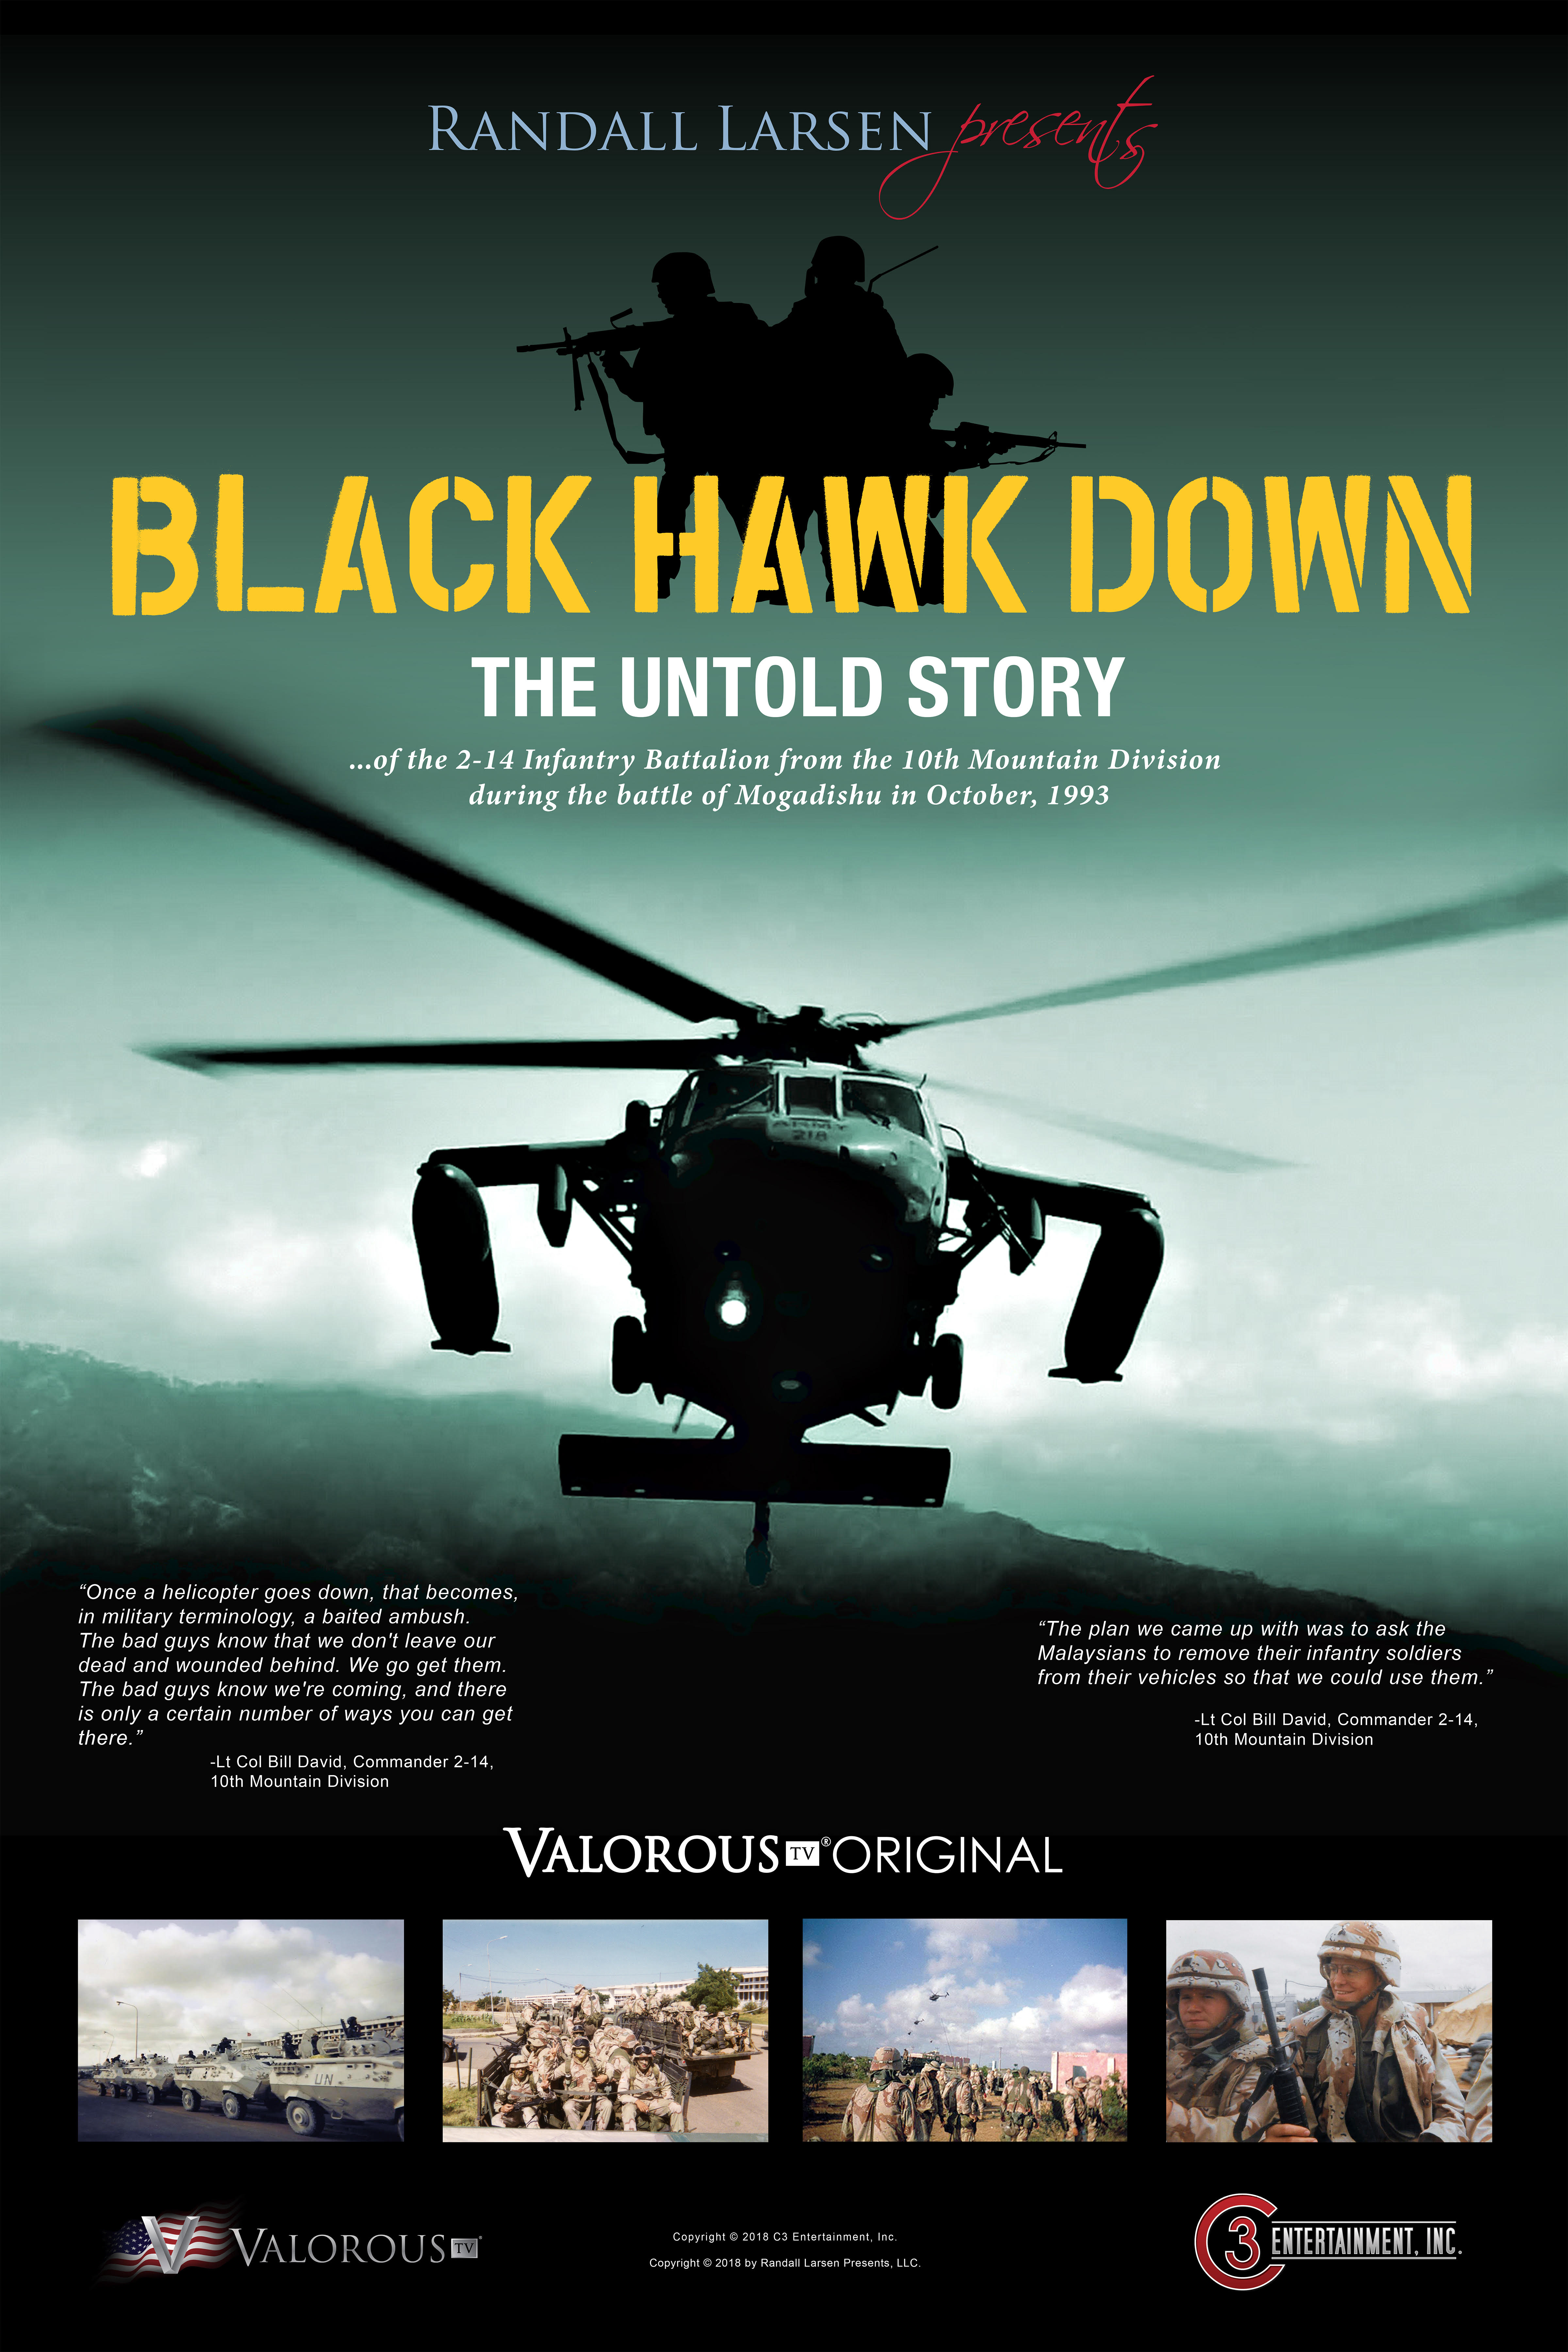 Download The Movie Poster - Black Hawk Down The Untold Story , HD Wallpaper & Backgrounds